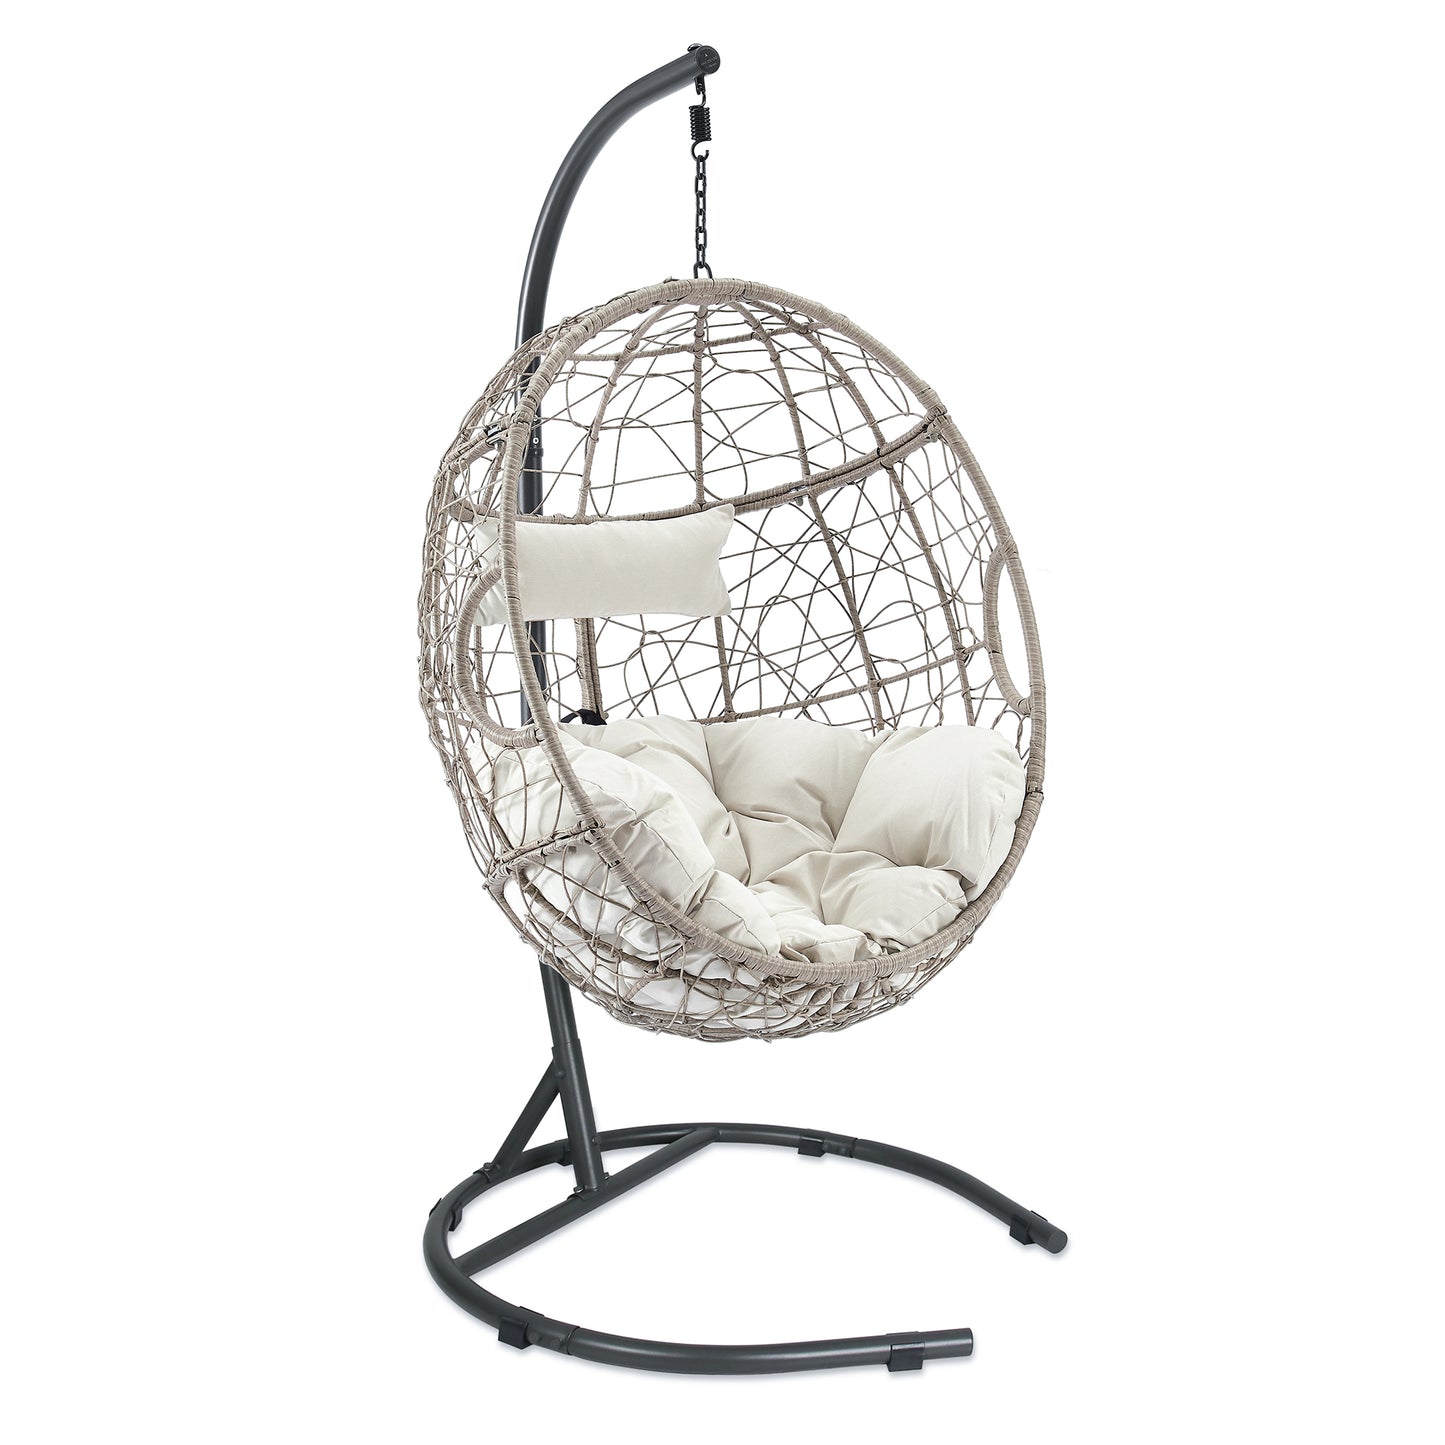 Outdoor Patio Wicker Hanging Basket Swing Chair Tear Drop Egg Chair with Cushion and Stand (Beige)